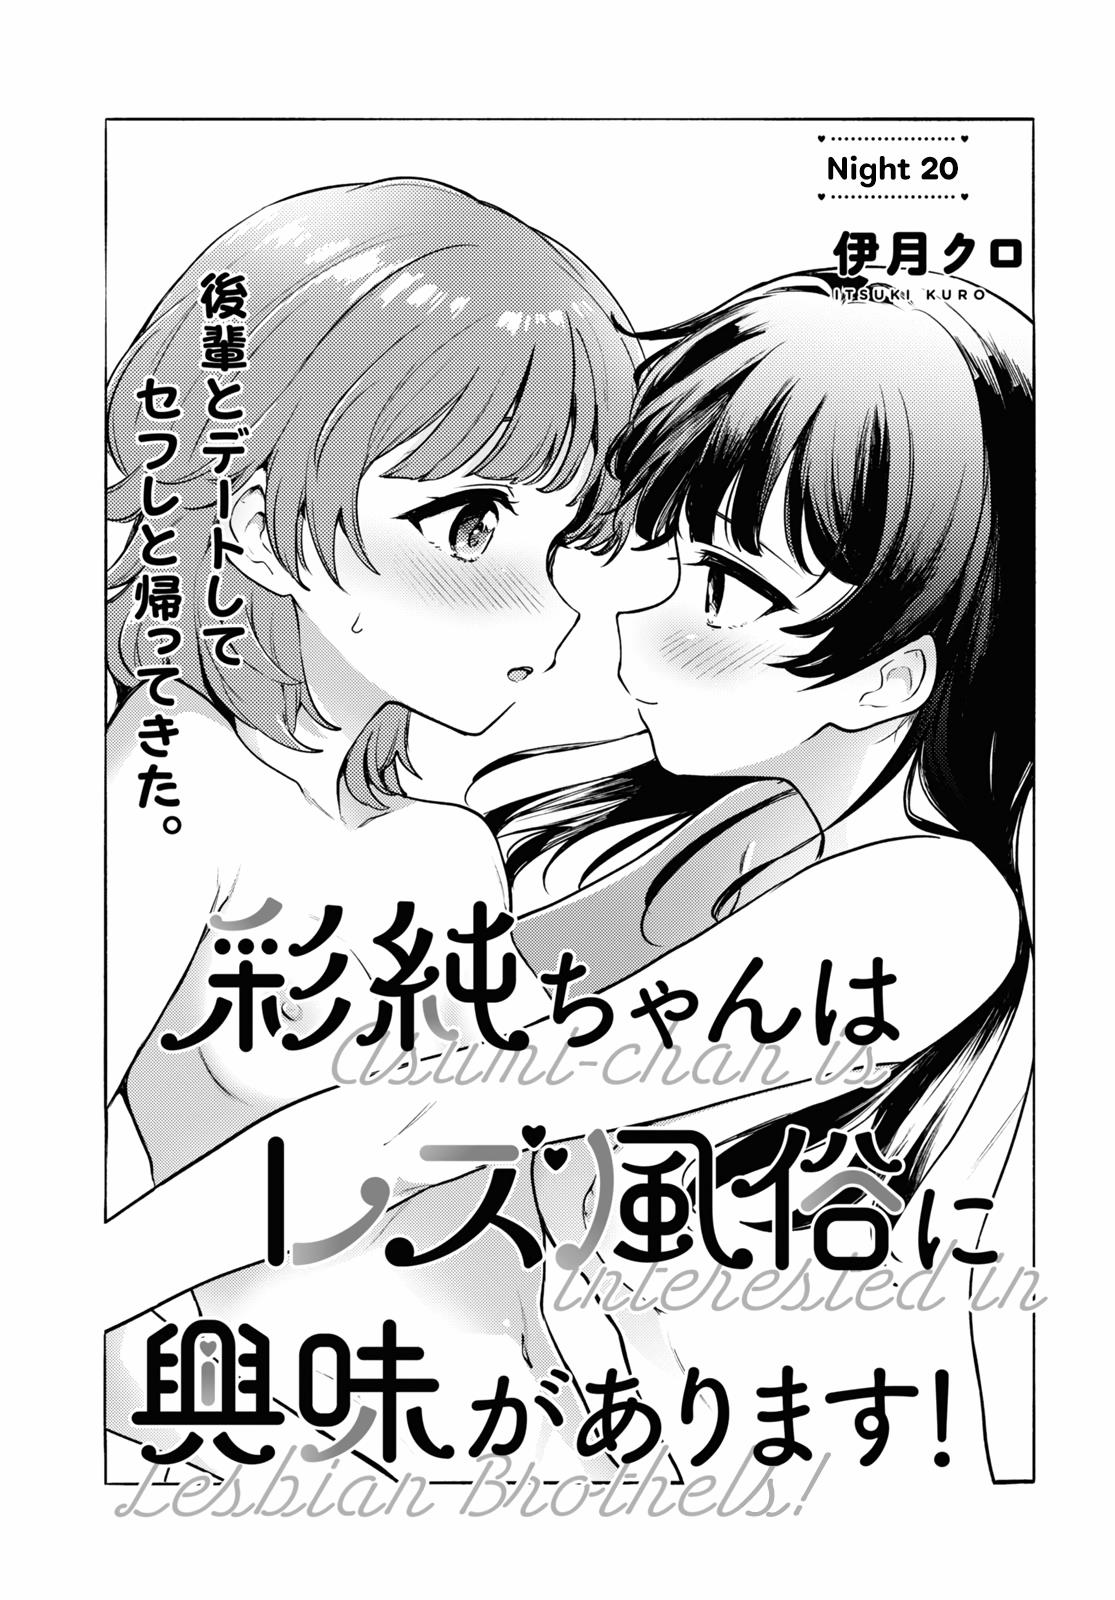 Asumi-Chan Is Interested In Lesbian Brothels! - Page 1